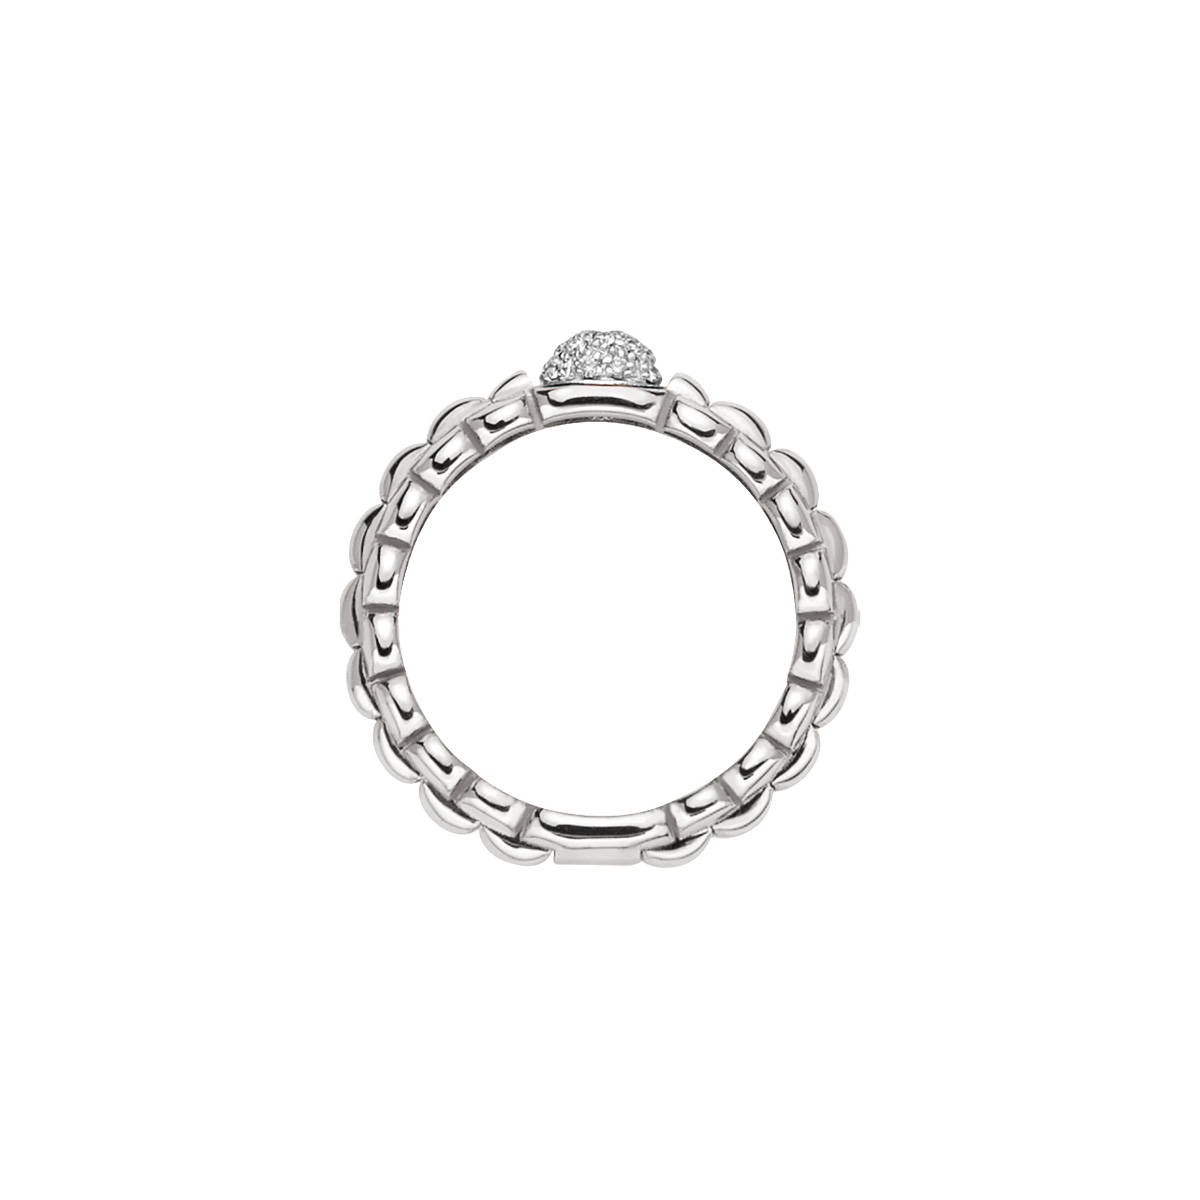 Fope Eka Tiny Collection Ring in White Gold with Diamond Pavè